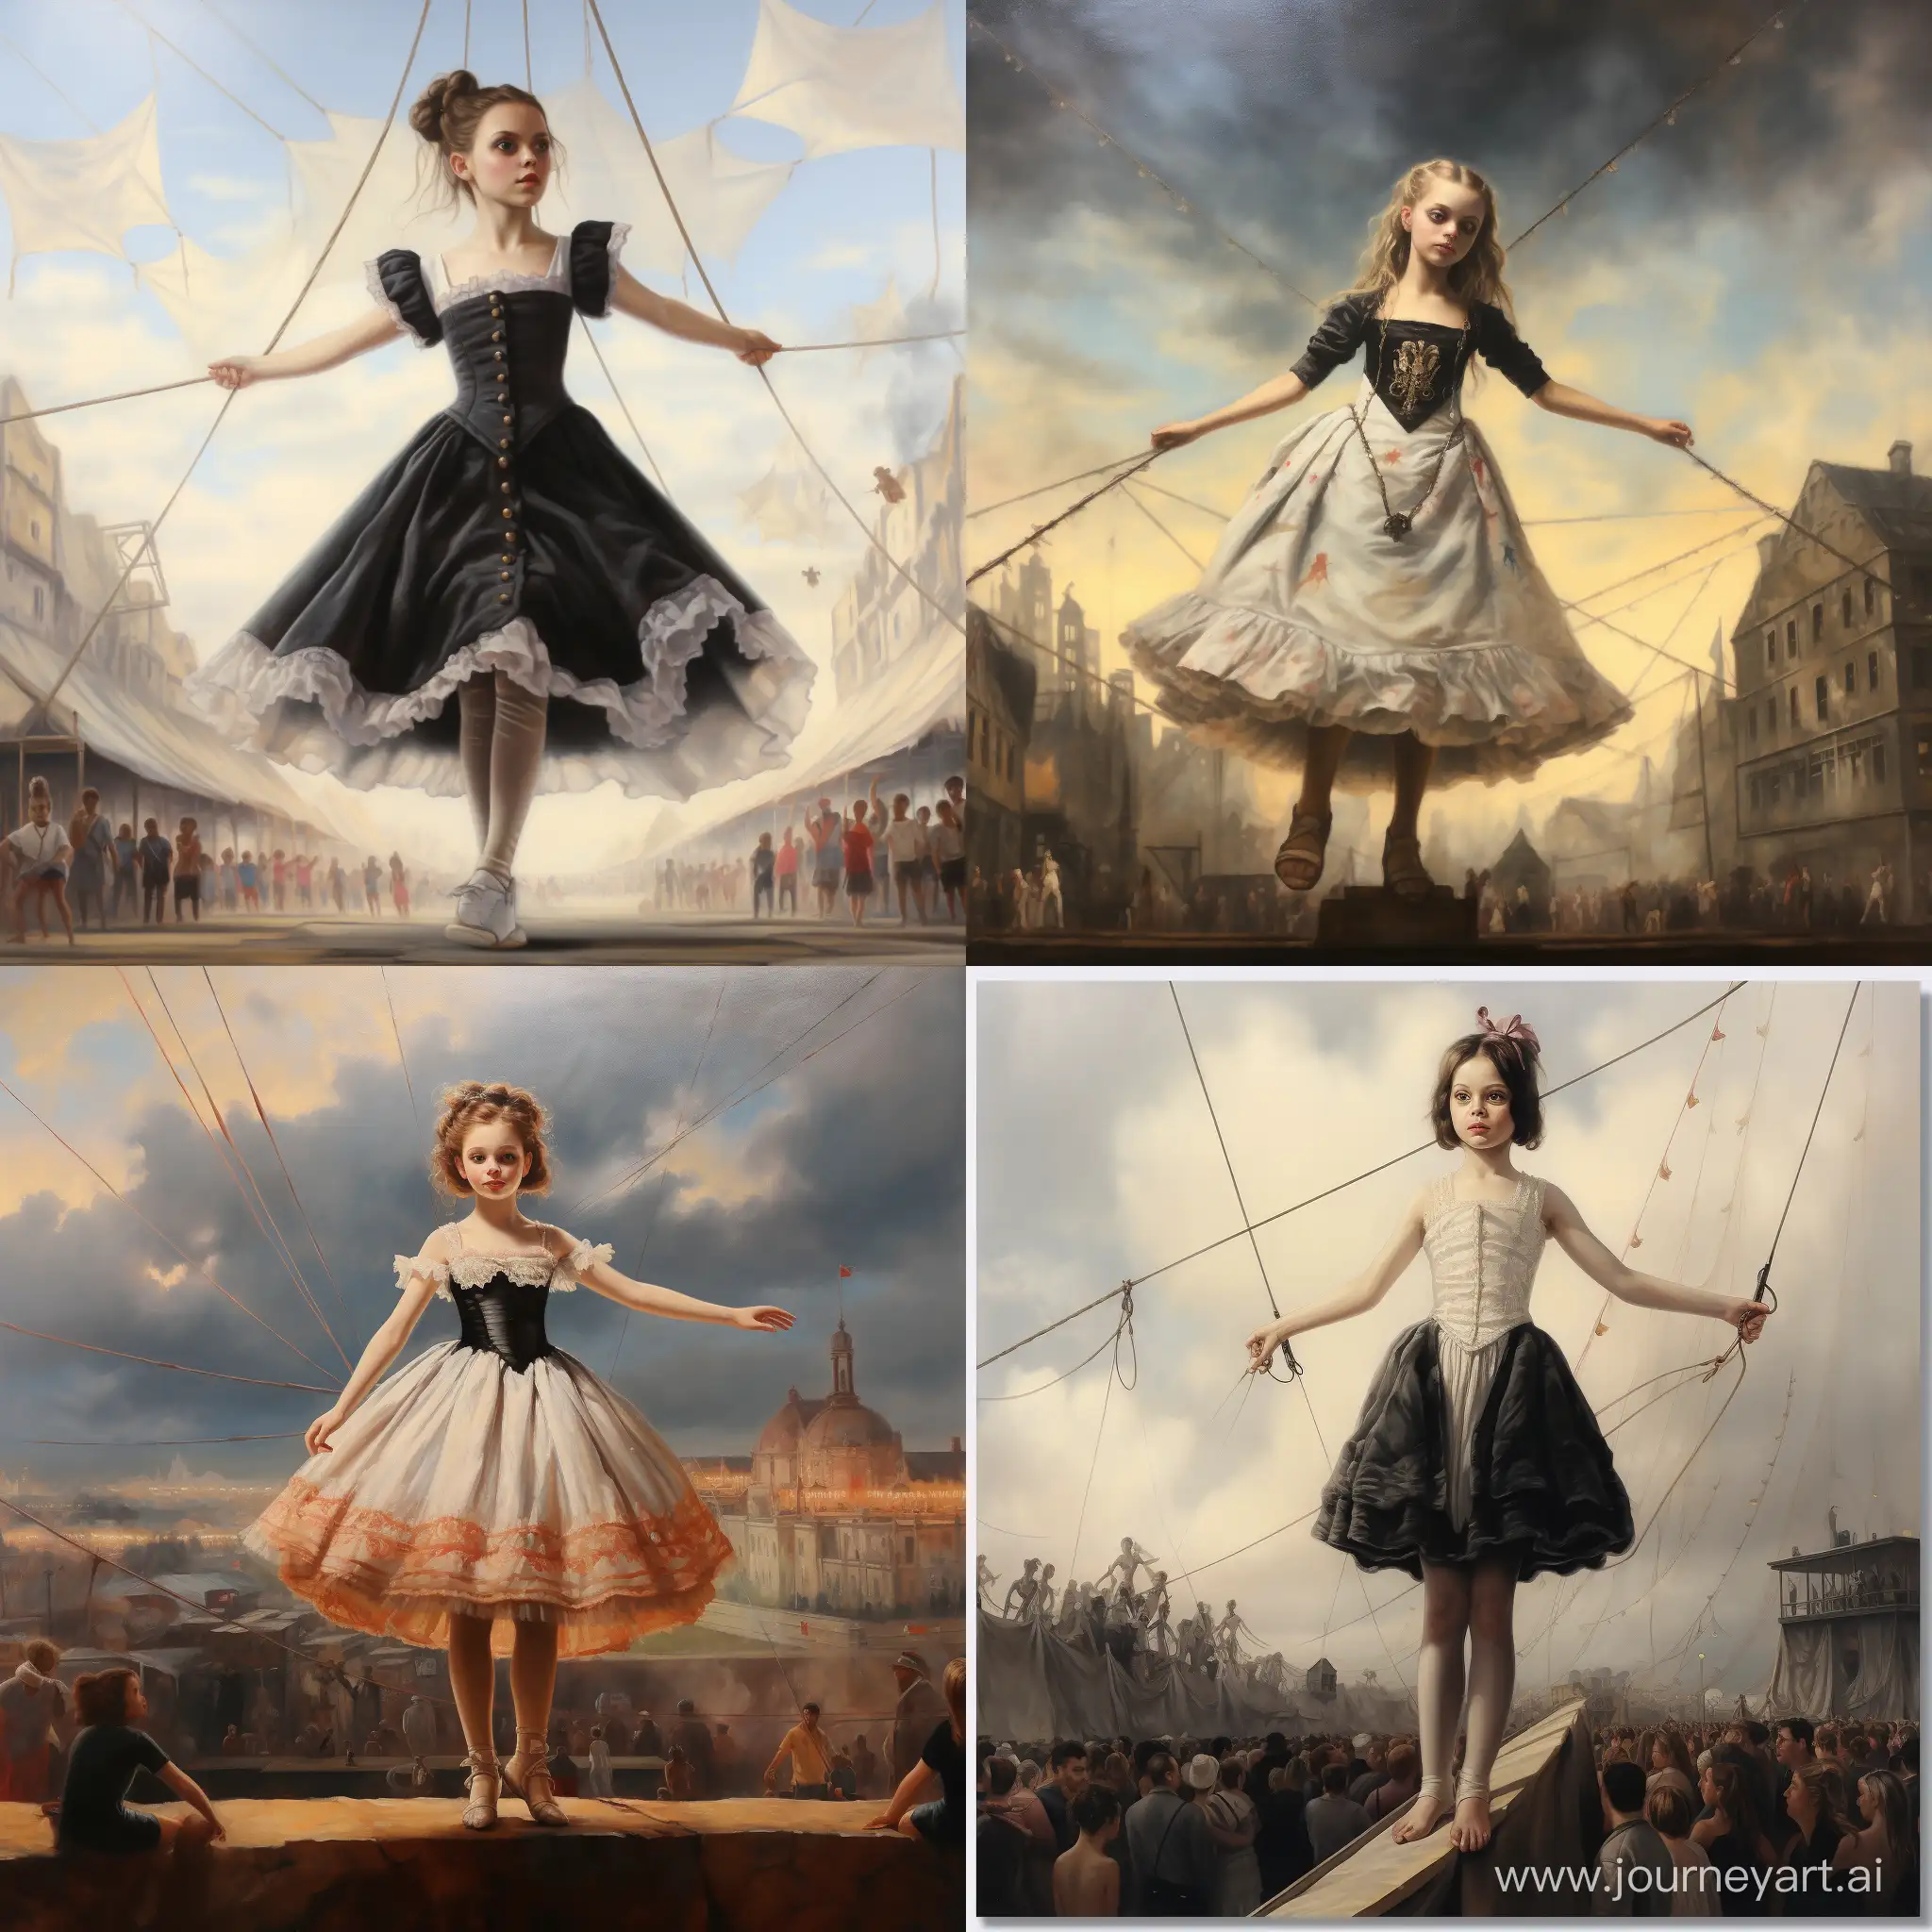 lowbrow painting of a young girl walking a tightrope in PT Barnum circus, wearing ballet shoes, high above the crowd and tents